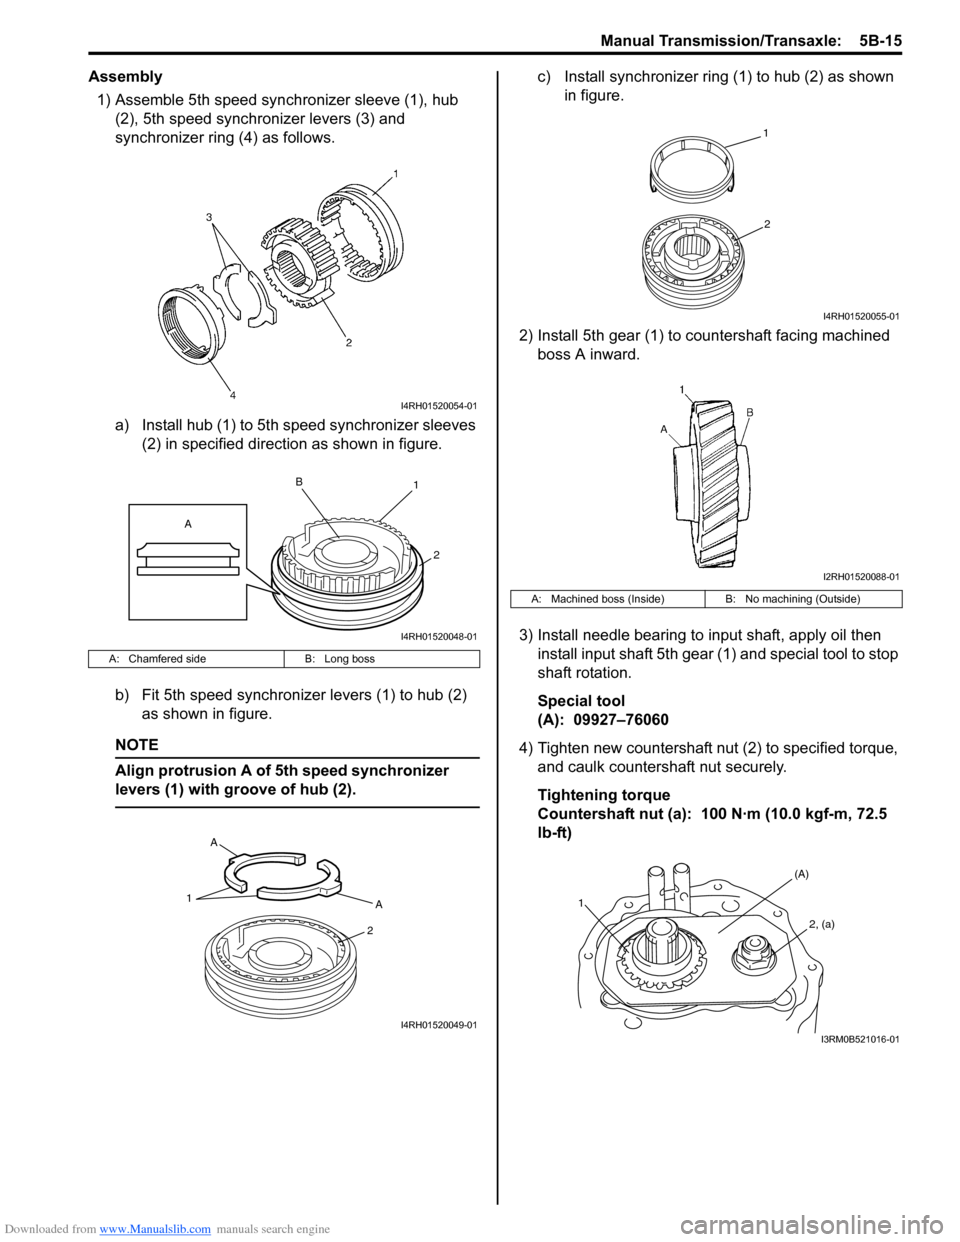 SUZUKI SWIFT 2006 2.G Service User Guide Downloaded from www.Manualslib.com manuals search engine Manual Transmission/Transaxle:  5B-15
Assembly1) Assemble 5th speed synchronizer sleeve (1), hub  (2), 5th speed synchronizer levers (3) and 
s